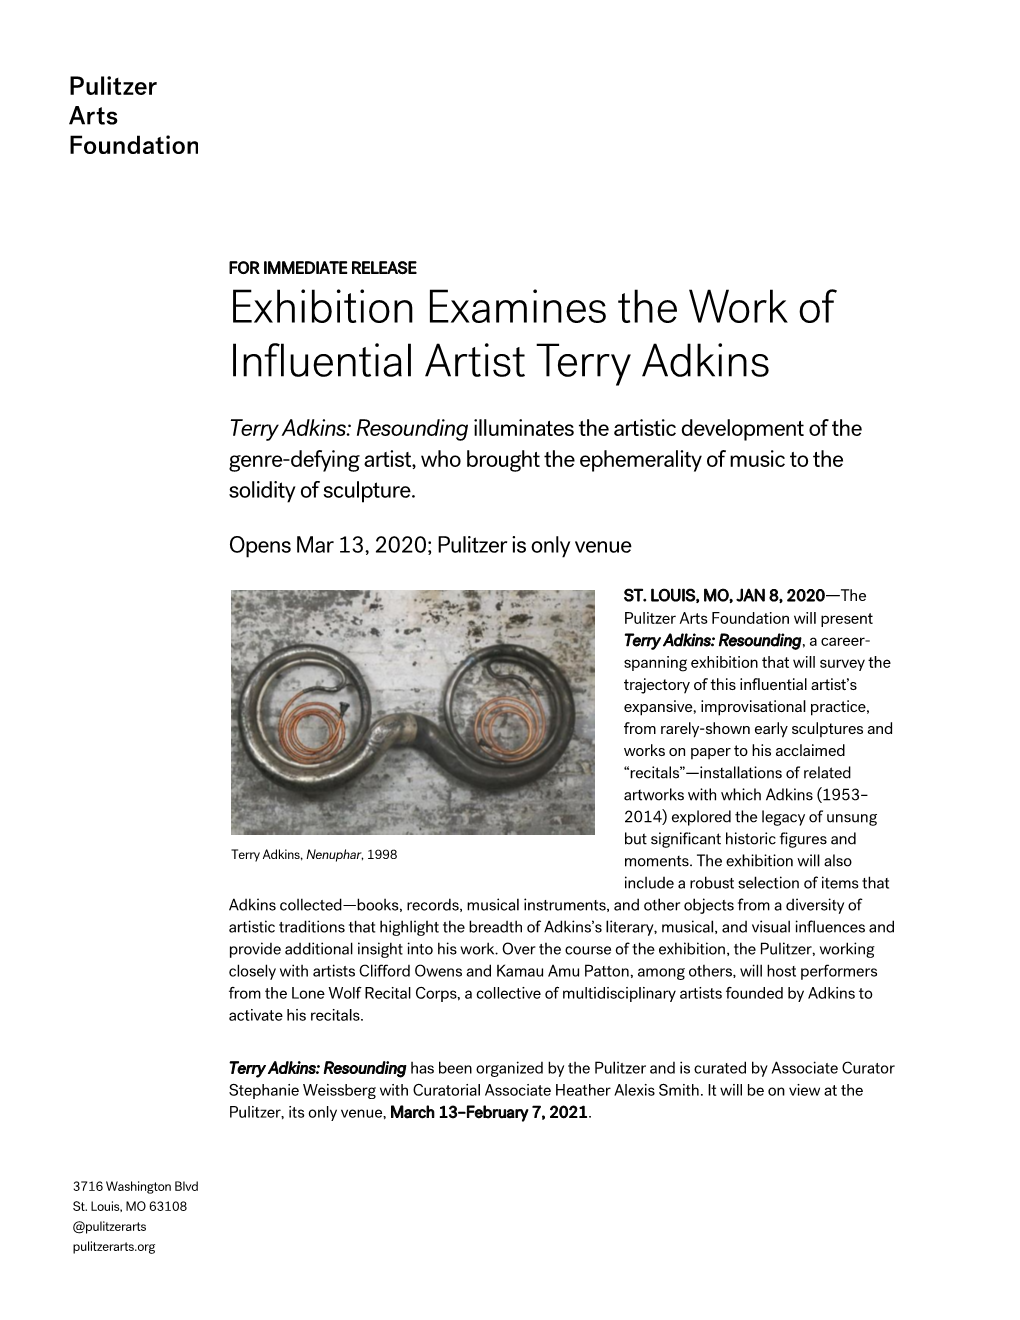 Exhibition Examines the Work of Influential Artist Terry Adkins